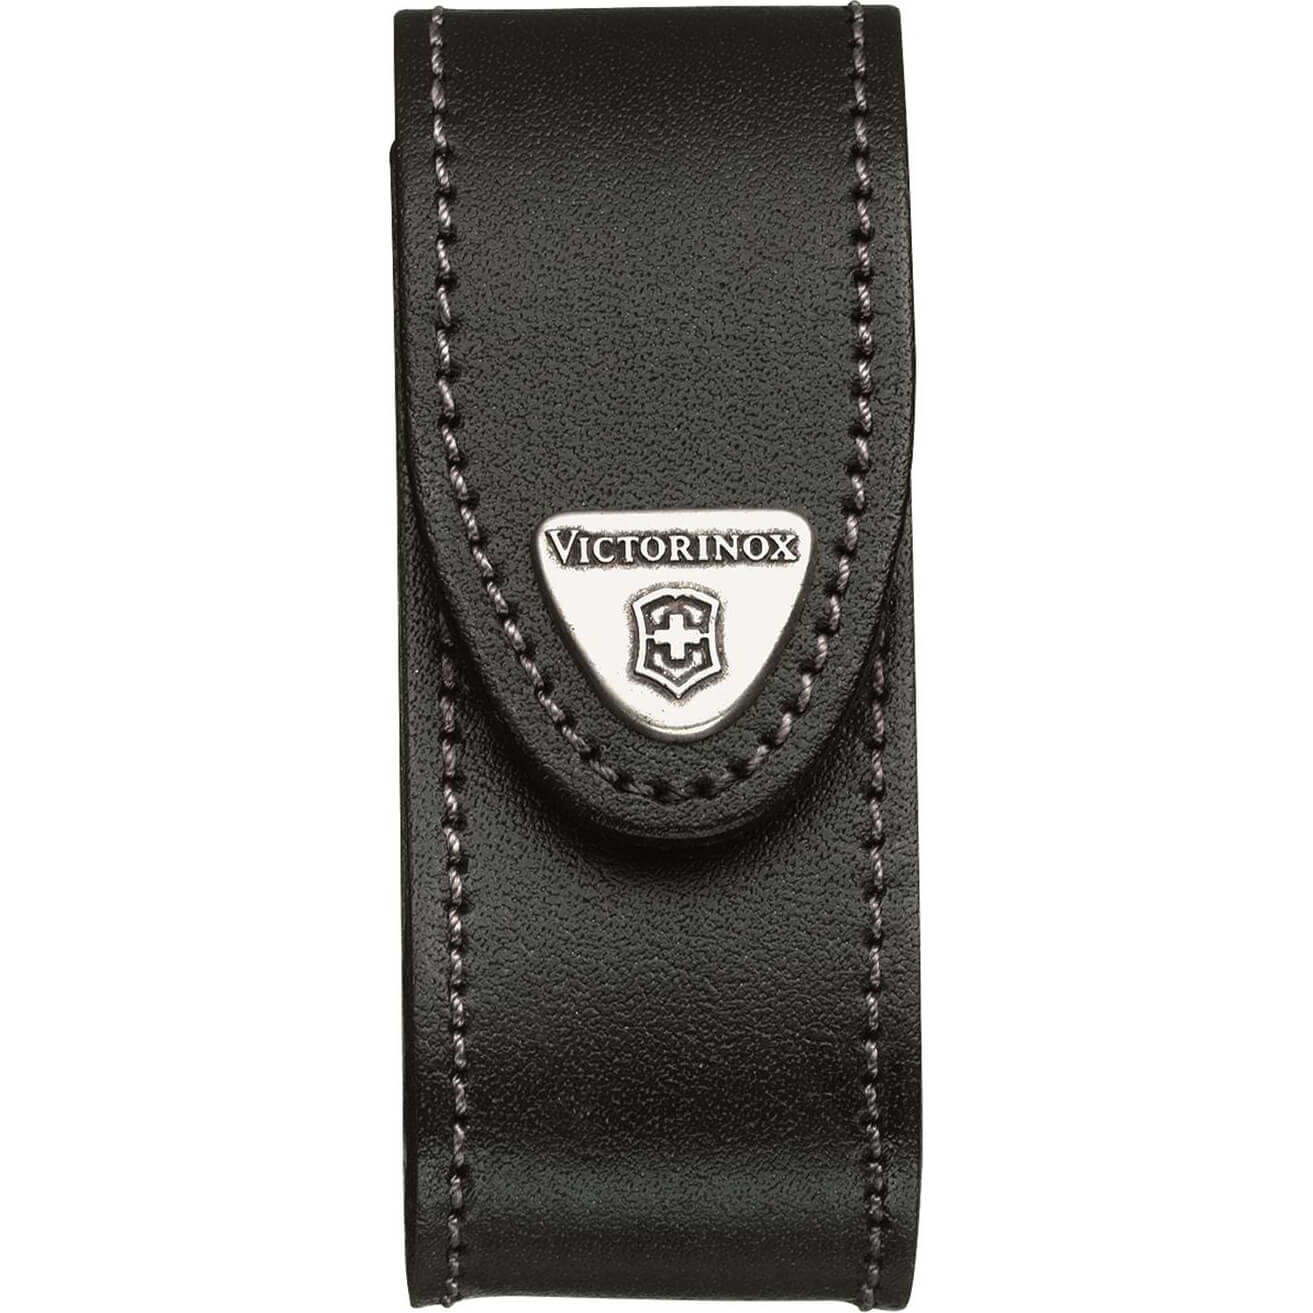 Victorinox Black Leather Pouch Fits 2-4 Layer Swiss Army Knives 4052030